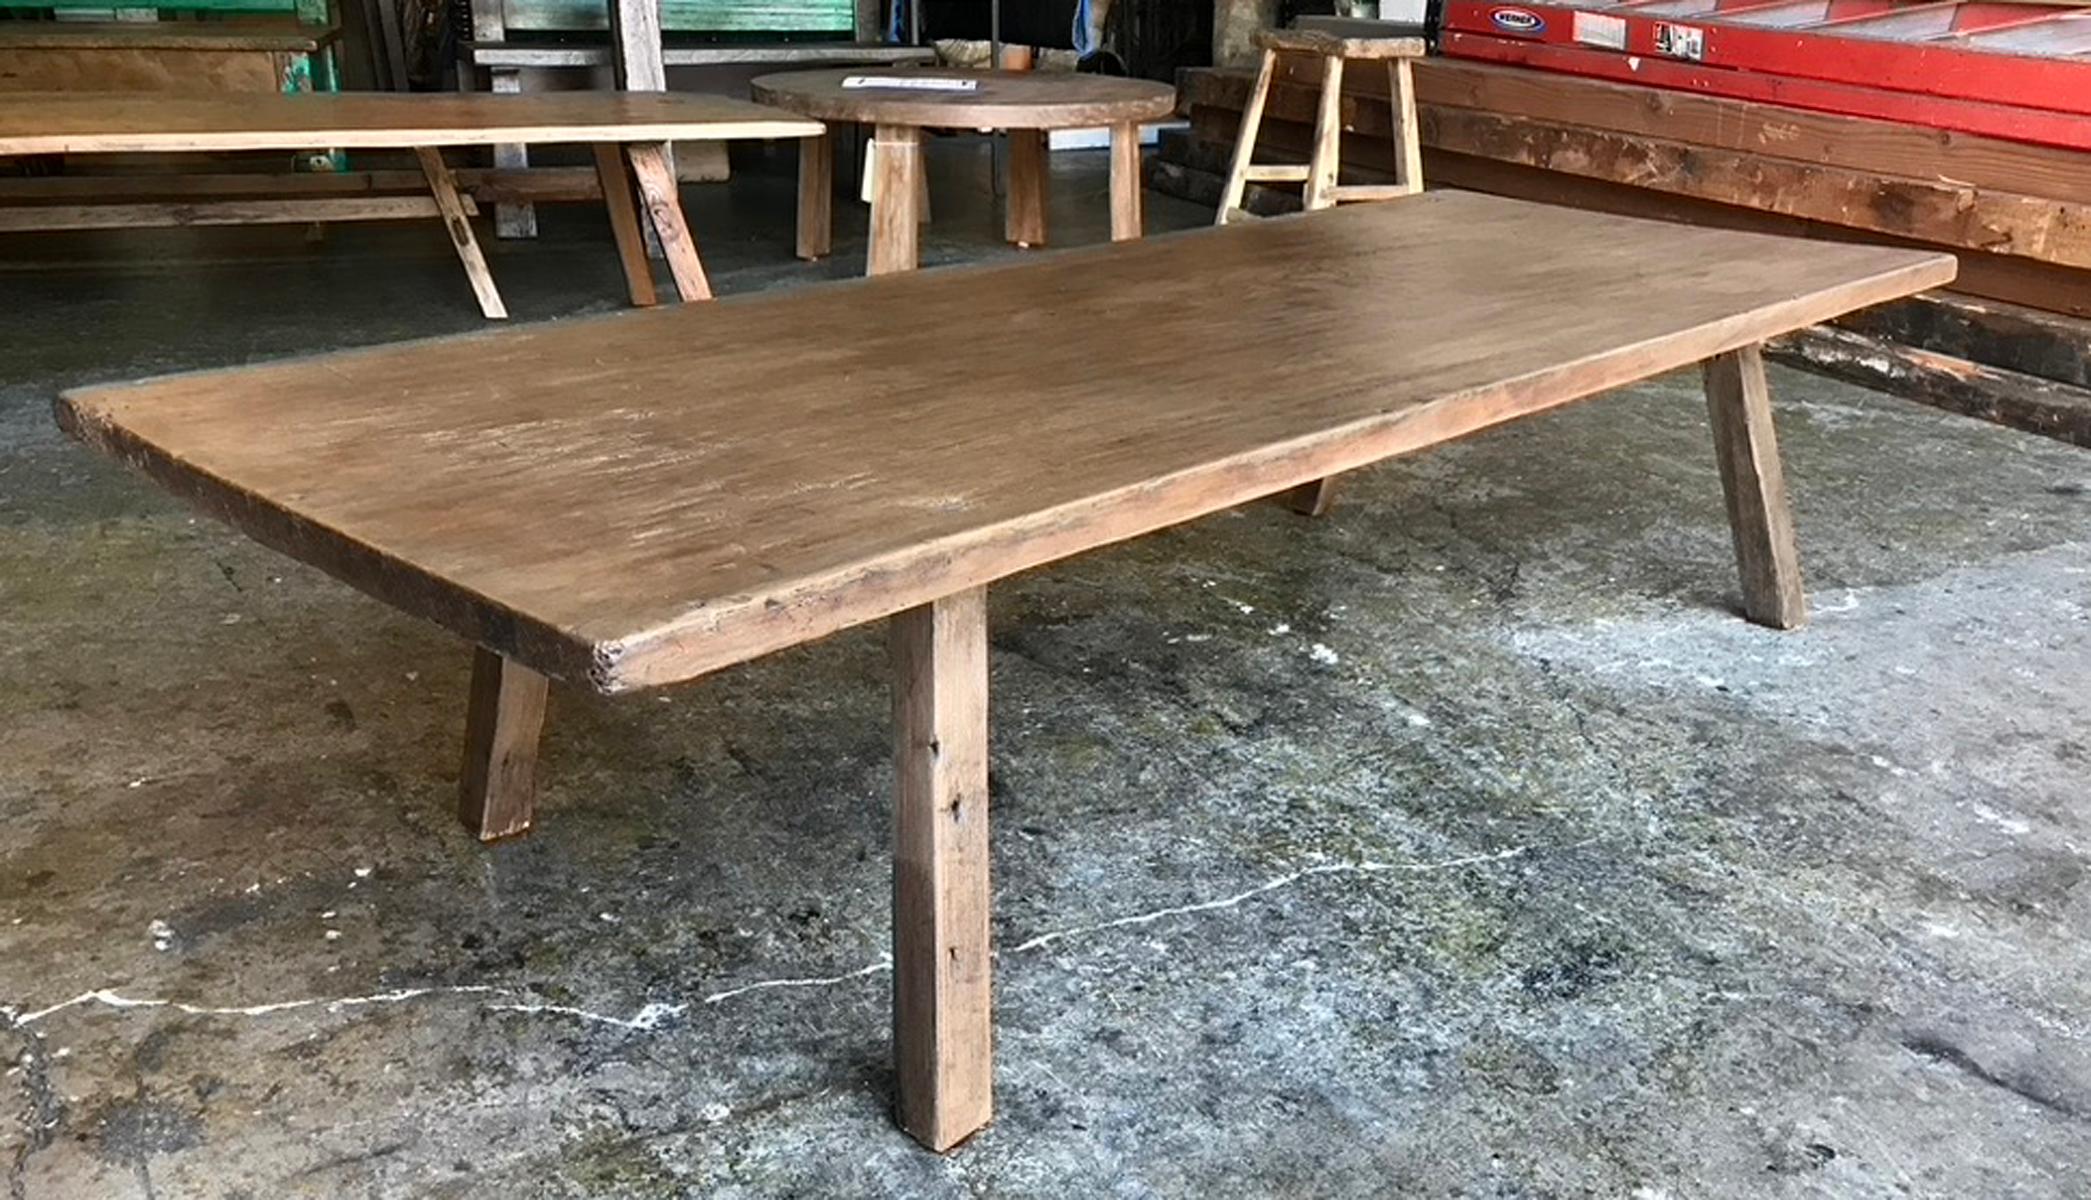 Rustic coffee table consisting of an antique one wide board from Guatemala, atop contemporary legs, finished to match the top. The top shows age appropriate wear, please see close up photos. Construction is new and sturdy